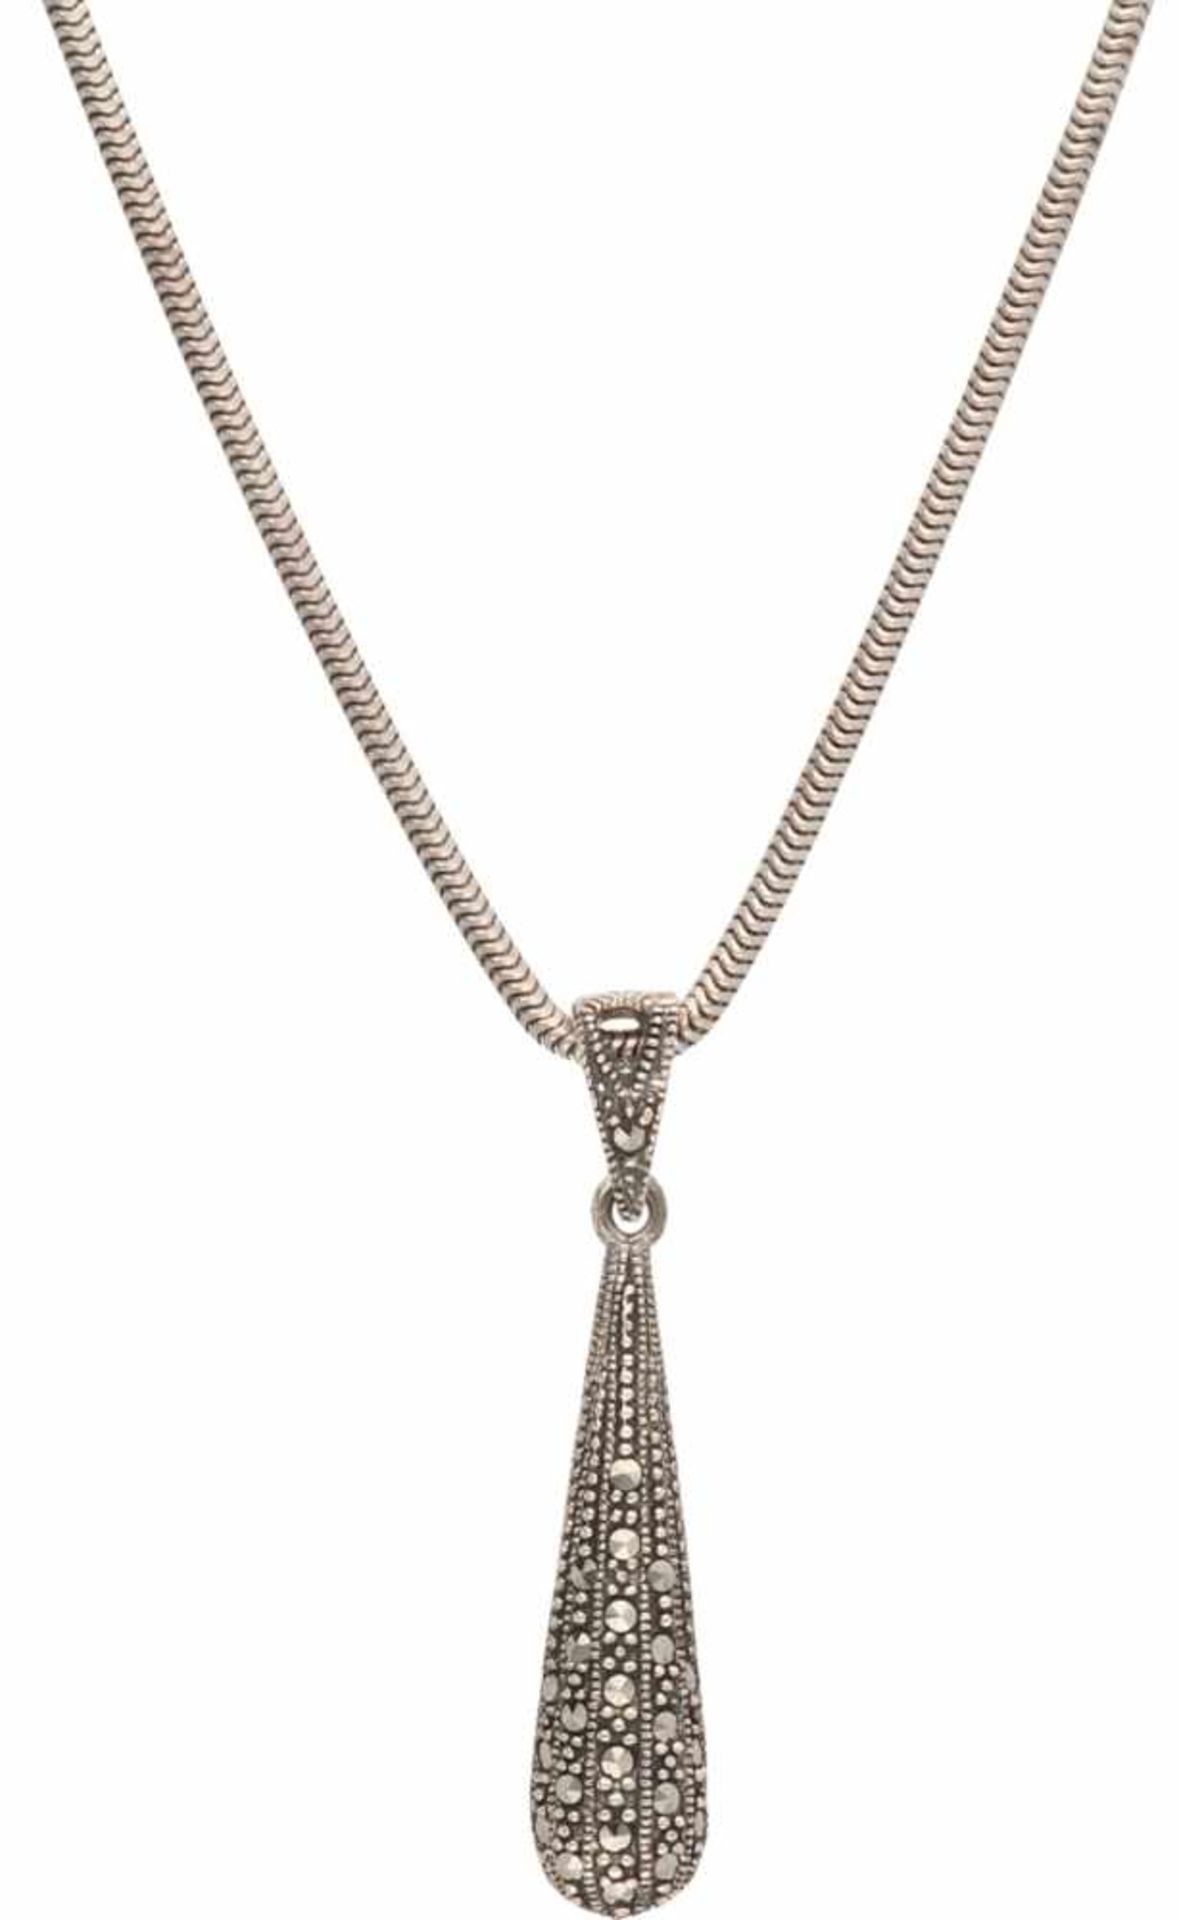 Necklace with pendant silver, marcasite - 925/1000.